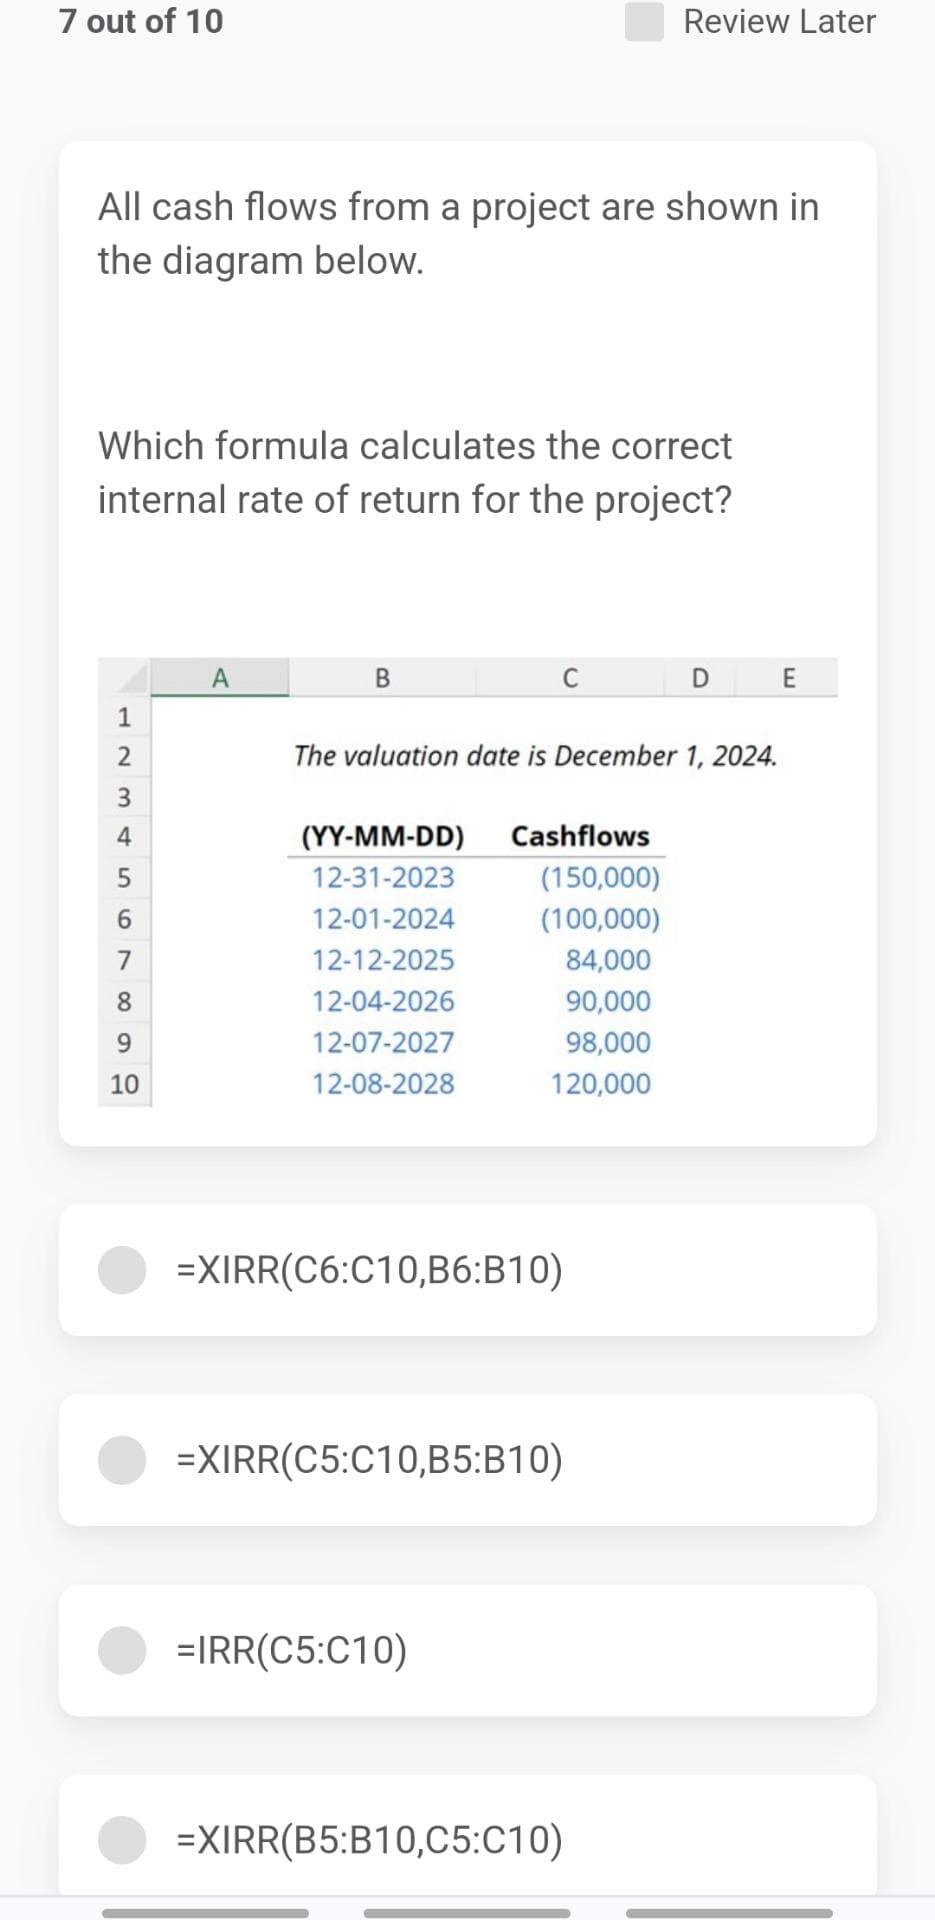 7 out of 10
All cash flows from a project are shown in
the diagram below.
Which formula calculates the correct
internal rate of return for the project?
1
2
3 & 5
4
6
7
8
9
10
A
B
(YY-MM-DD)
12-31-2023
12-01-2024
12-12-2025
12-04-2026
12-07-2027
12-08-2028
C
The valuation date is December 1, 2024.
Cashflows
(150,000)
(100,000)
84,000
90,000
98,000
120,000
=XIRR(C6:C10,B6:B10)
=IRR(C5:C10)
Review Later
=XIRR(C5:C10,B5:B10)
=XIRR(B5:B10,C5:C10)
DE